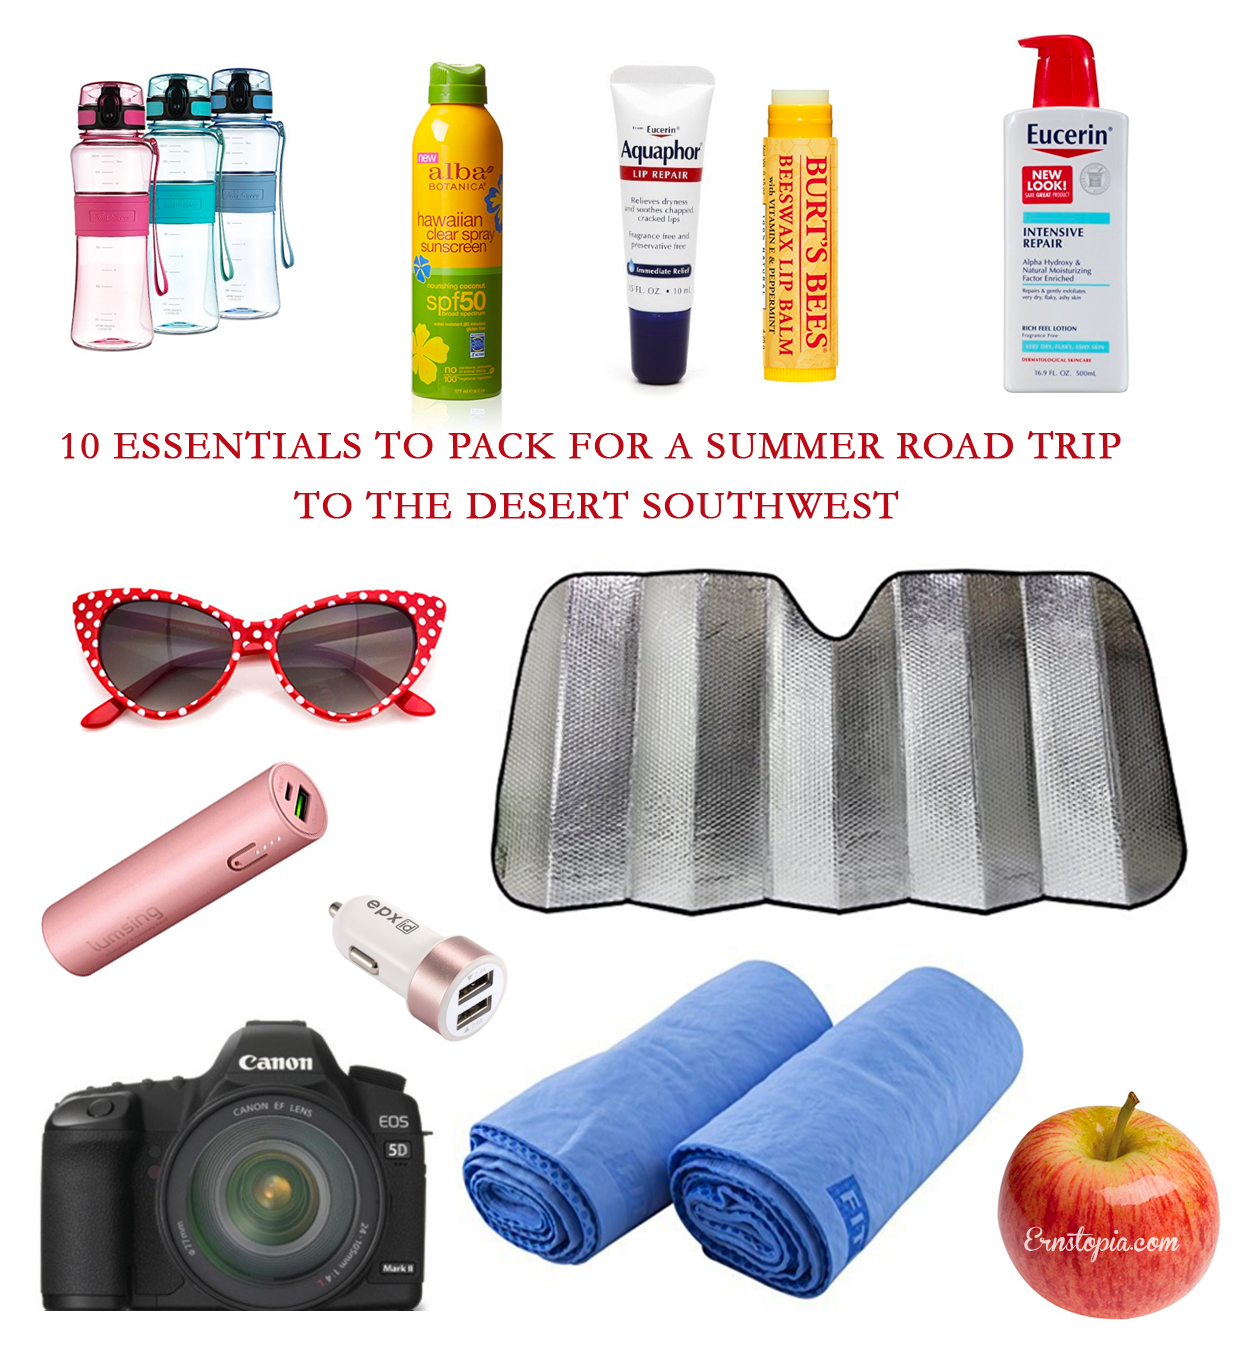 Top 10 Ideas to Make the Road Trips More Fun